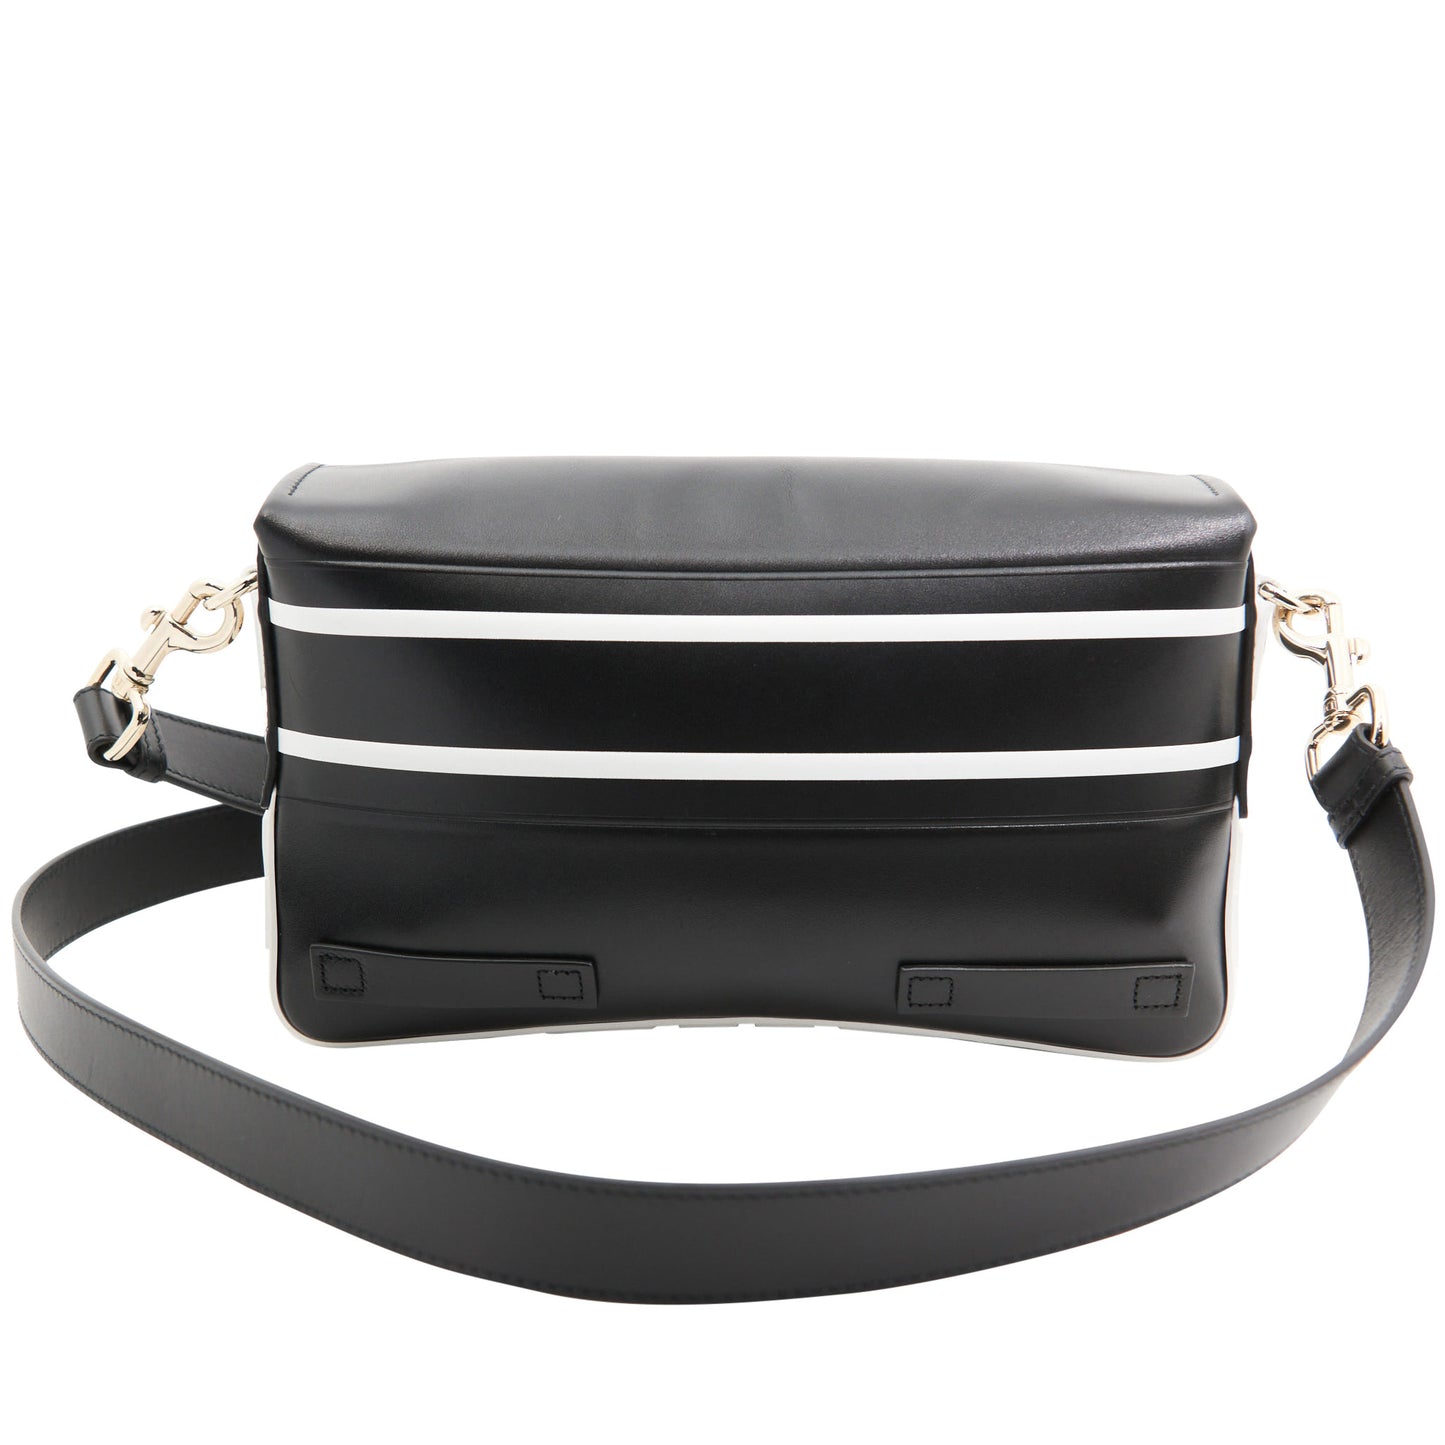 Christian Dior Leather Campbag in Black and White